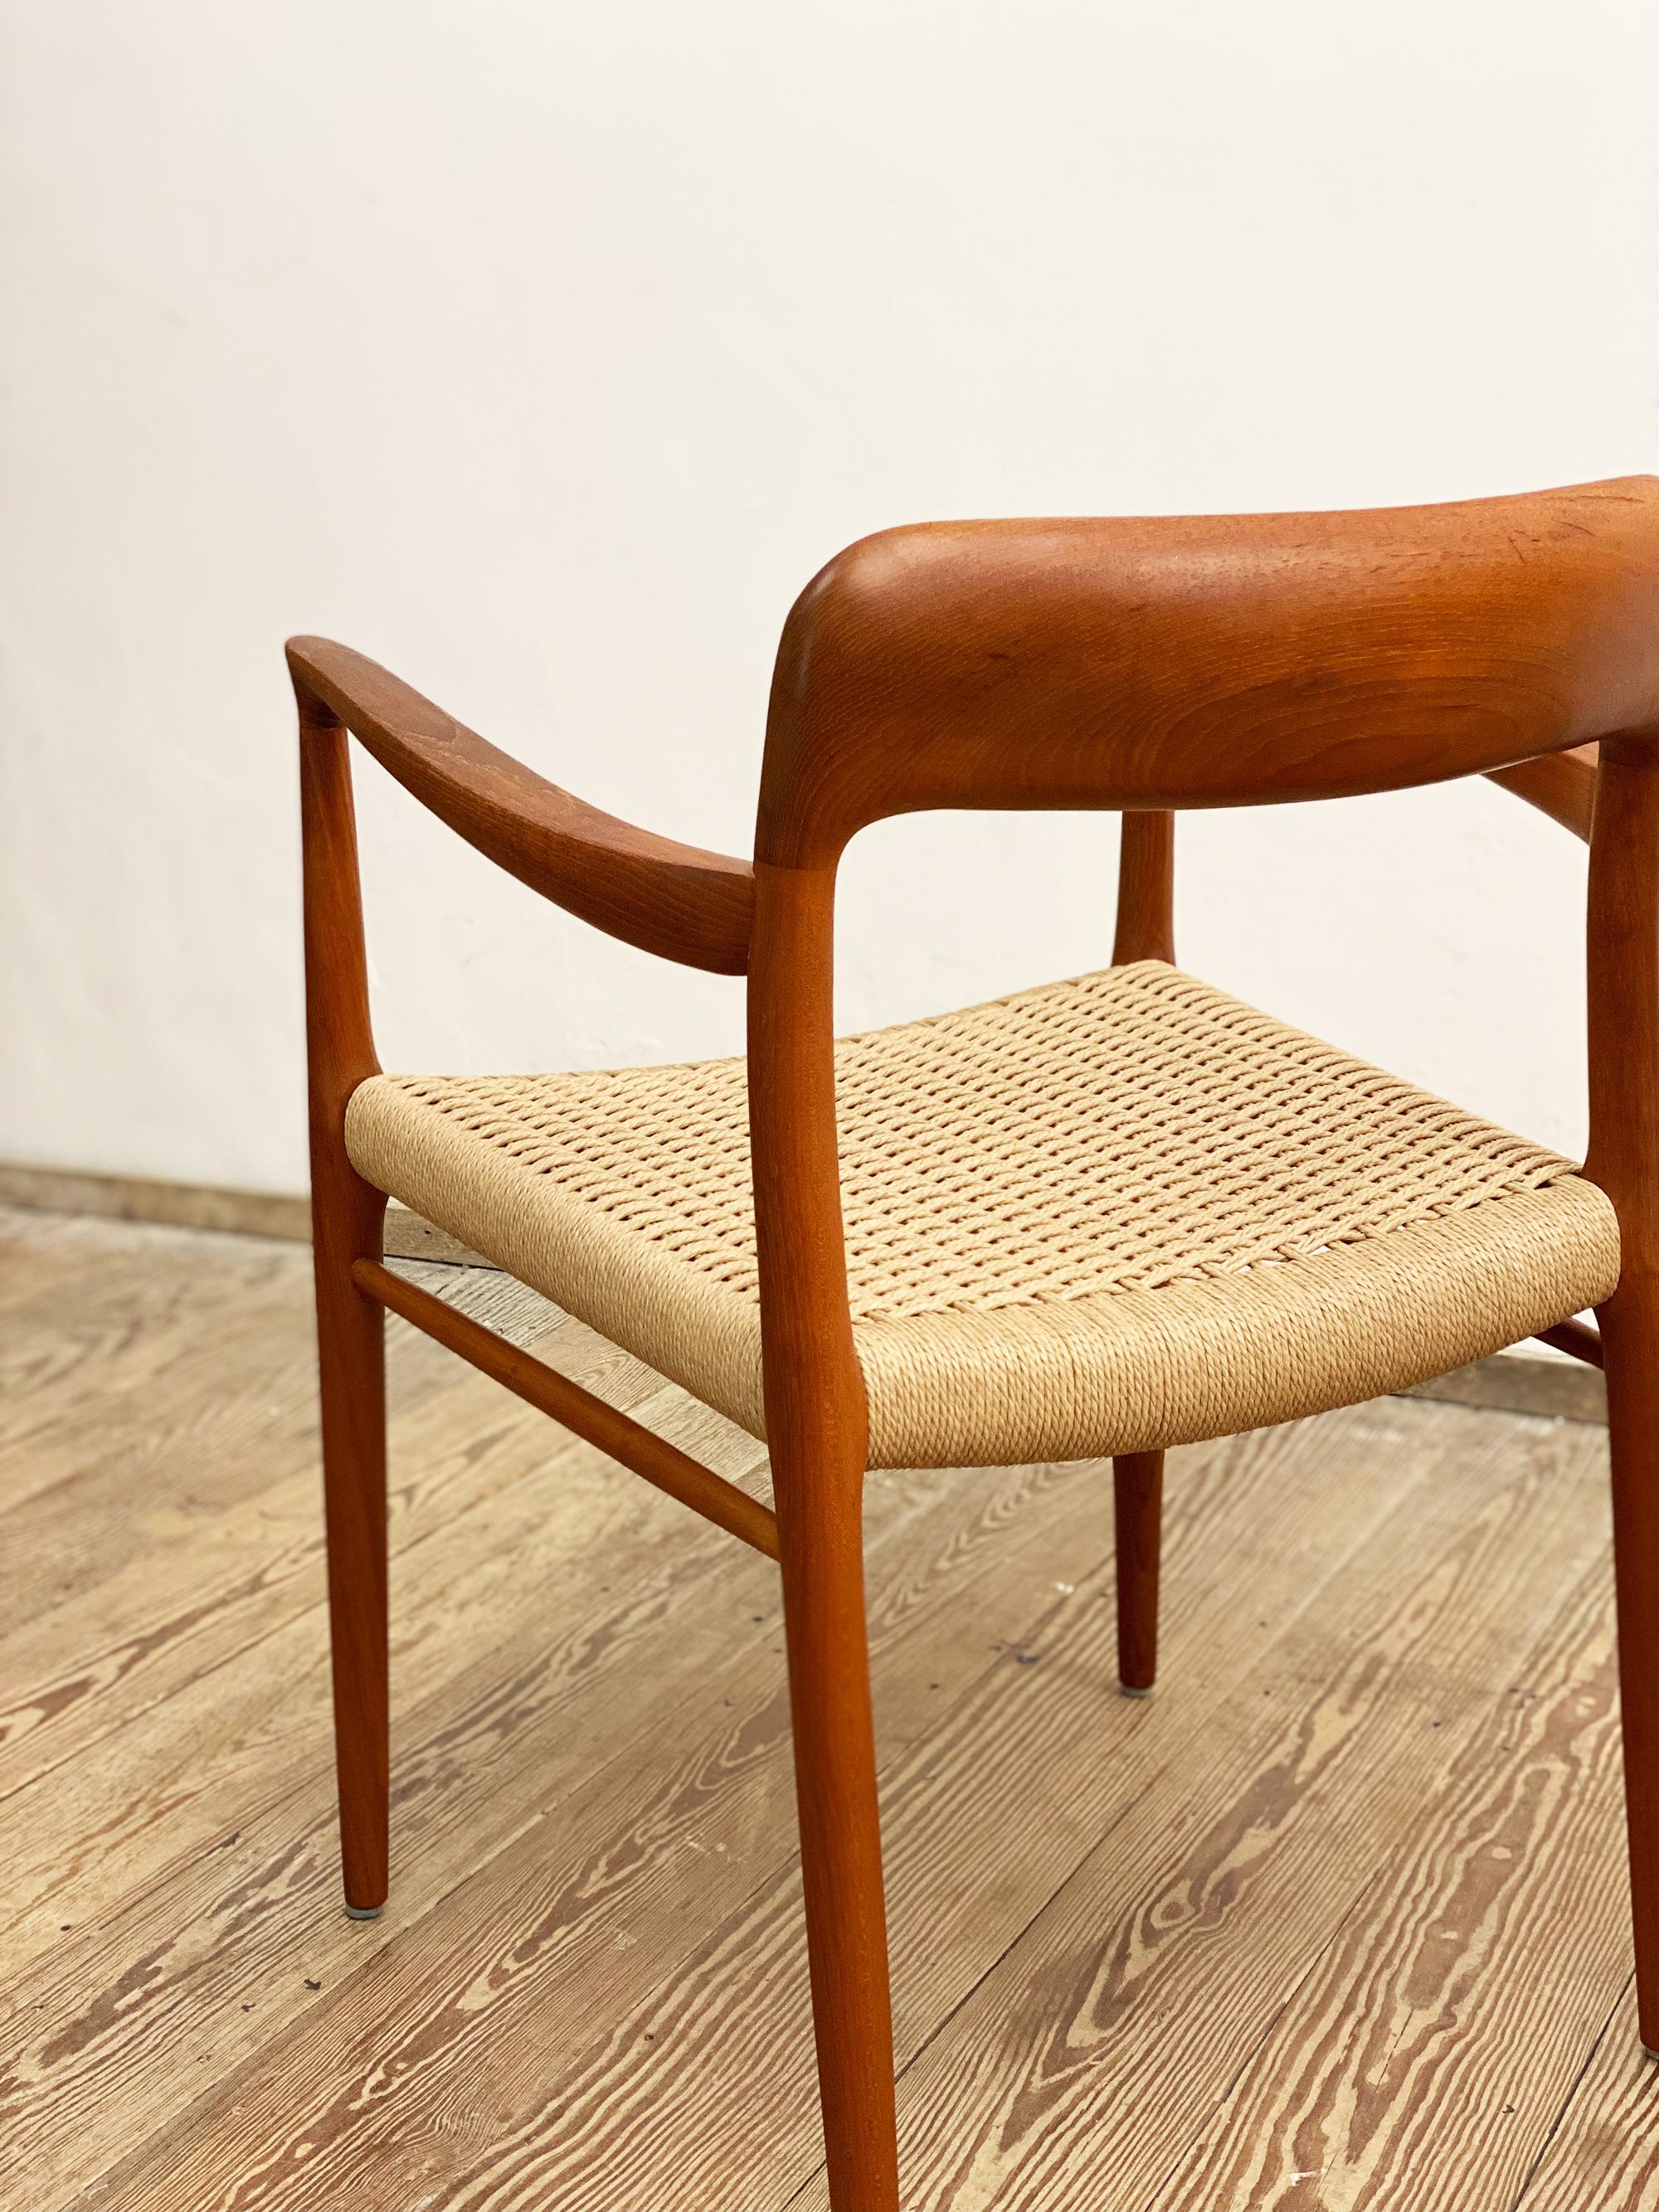 Mid-20th Century Pair of Mid-Century Teak Dining Chairs #56 by Niels O. Møller for J. L. Moller For Sale